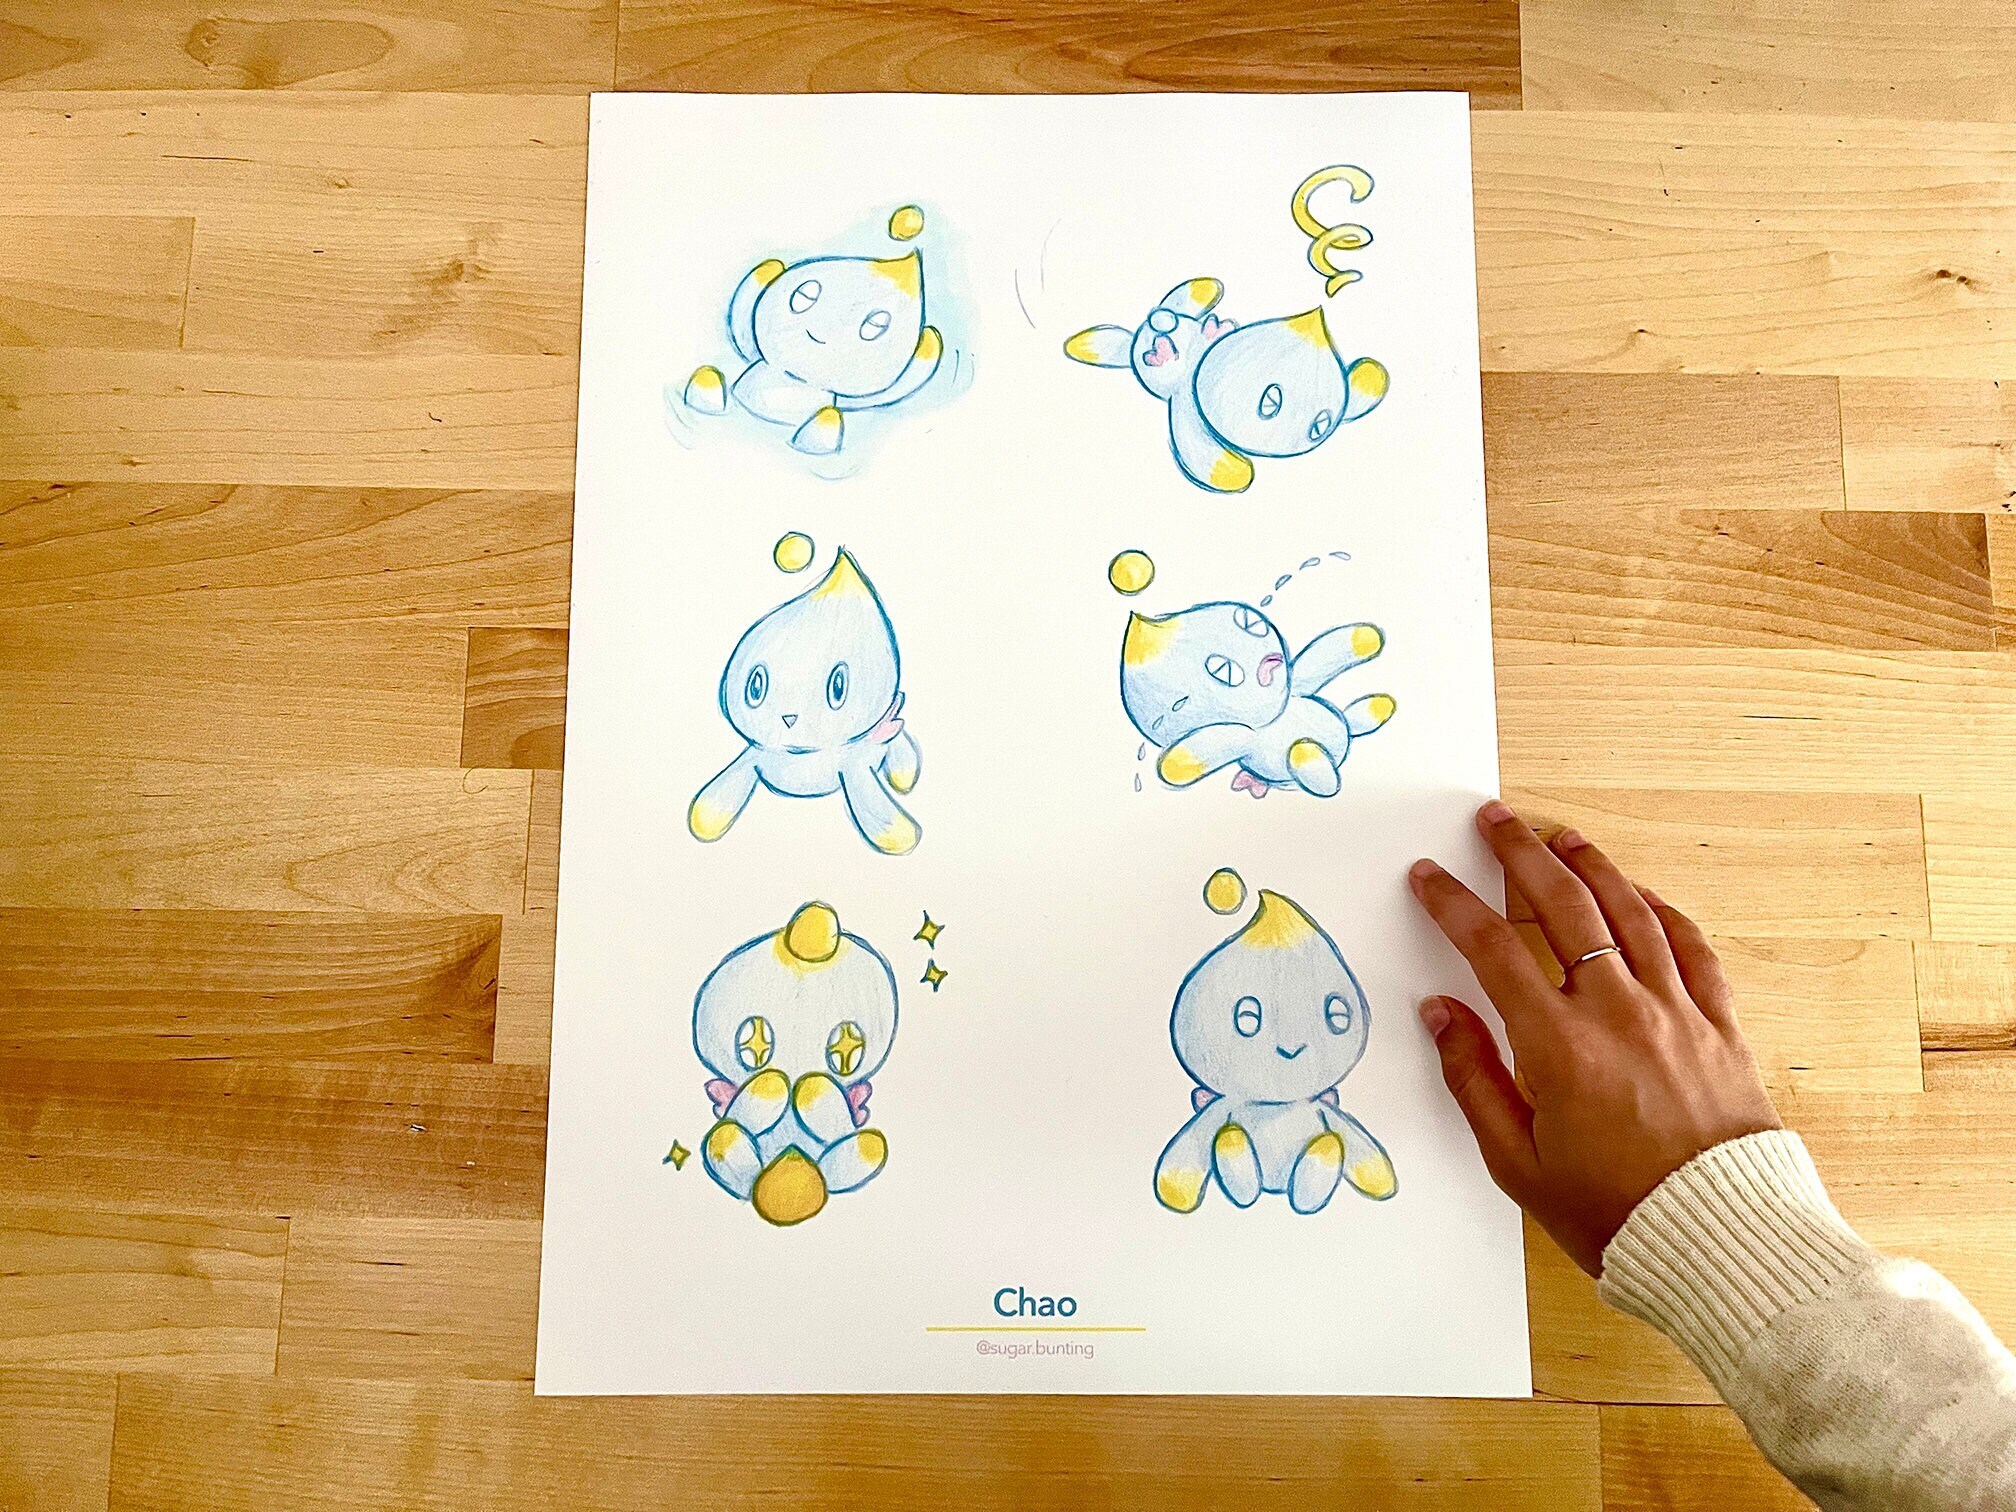 Sonic Channel Japan Official Artwork of the Chao in the Chao